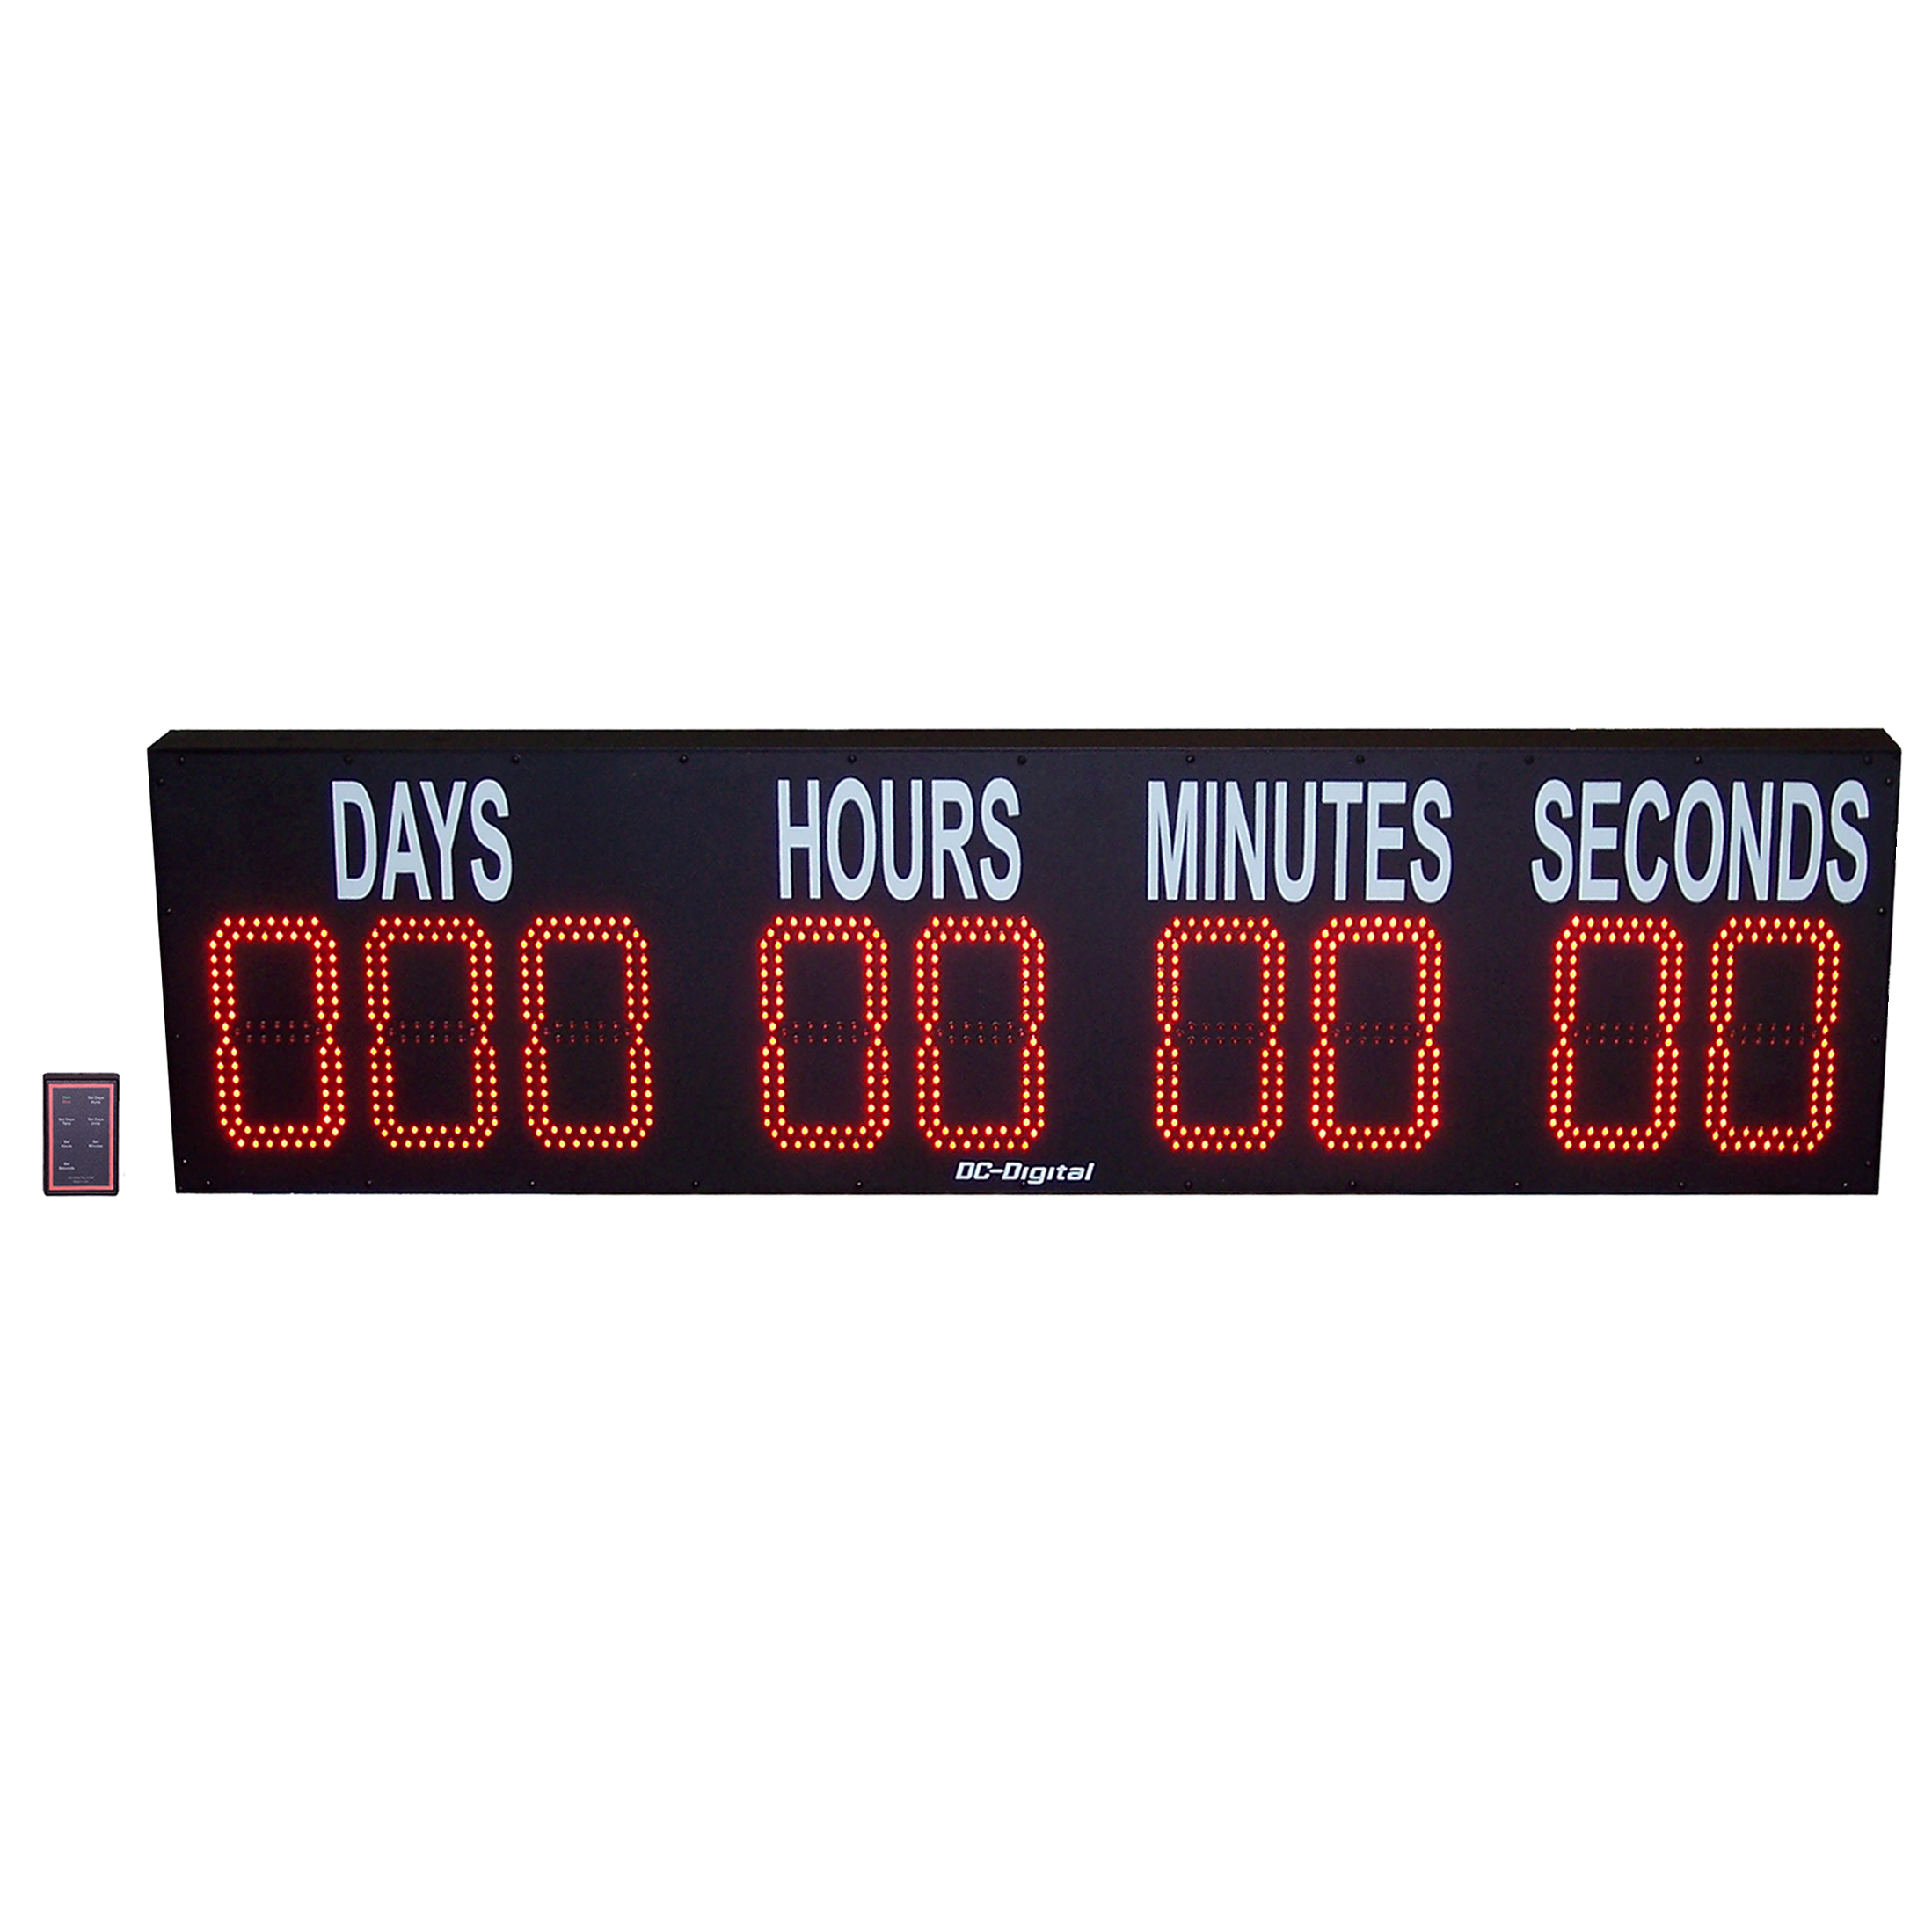 (DC-809T-DN-W) 8.0 Inch LED Digital, RF-Wireless Handheld Controlled, Countdown Timer, Days, Hours, Minutes, Seconds (OUTDOOR)